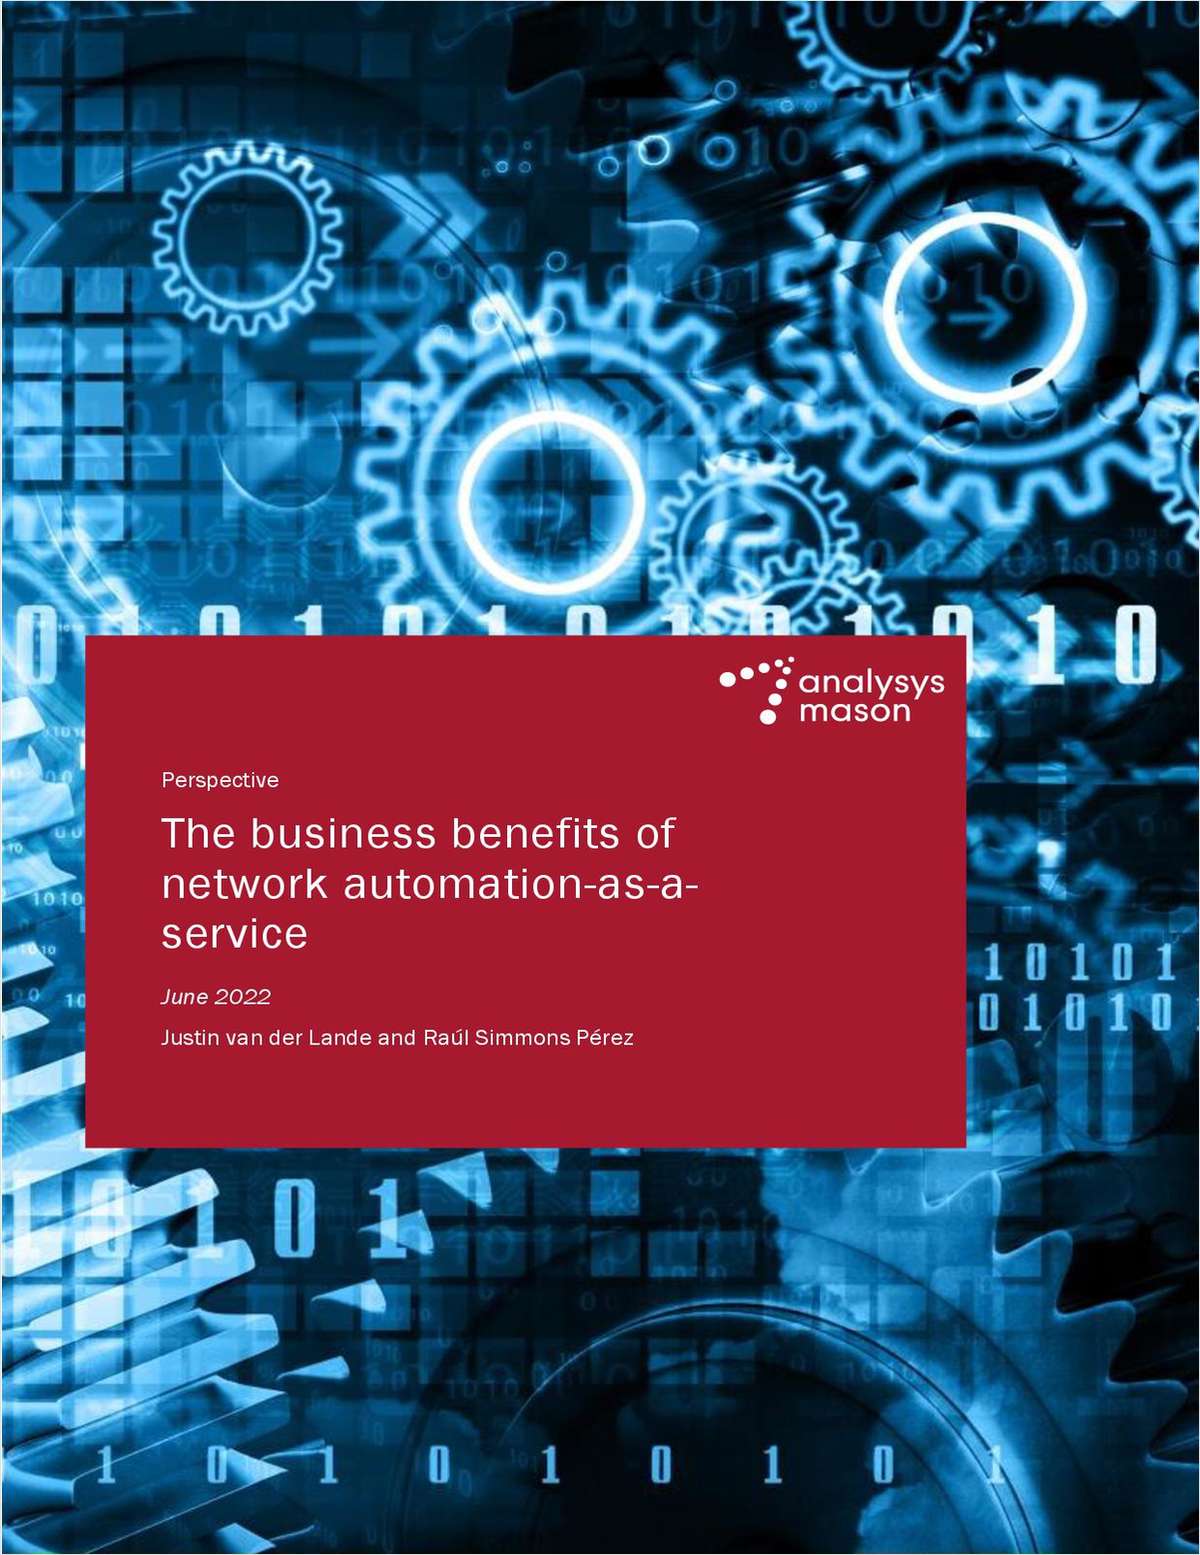 The Business Benefits of Network Automation-as-a-Service